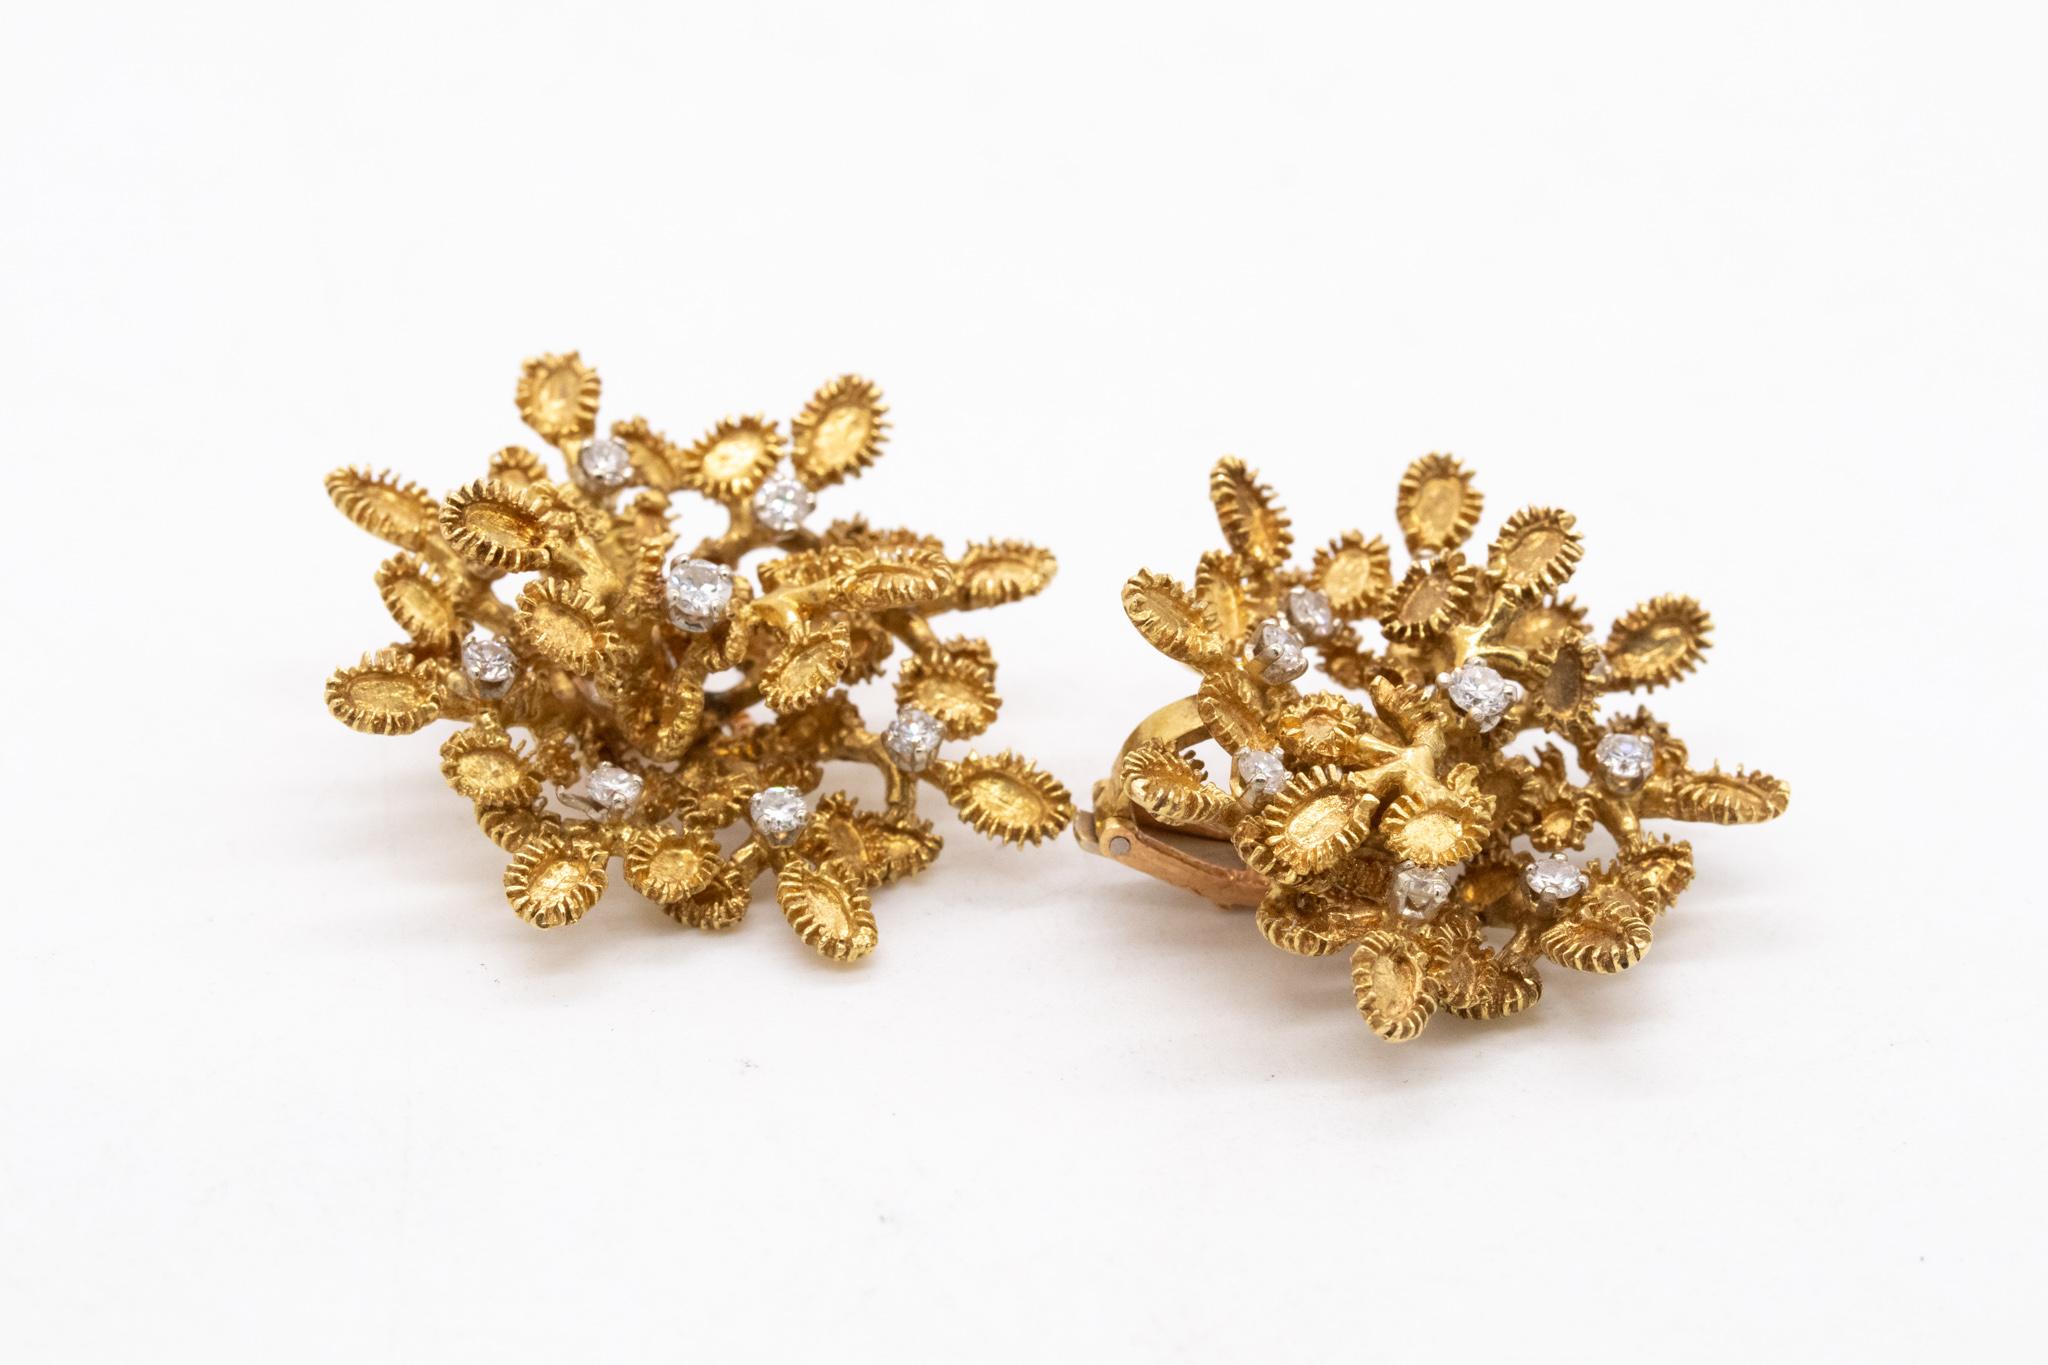 French 1950 Post War Retro Earrings 18Kt Gold and Platinum 1.08 Cts in Diamonds In Excellent Condition For Sale In Miami, FL